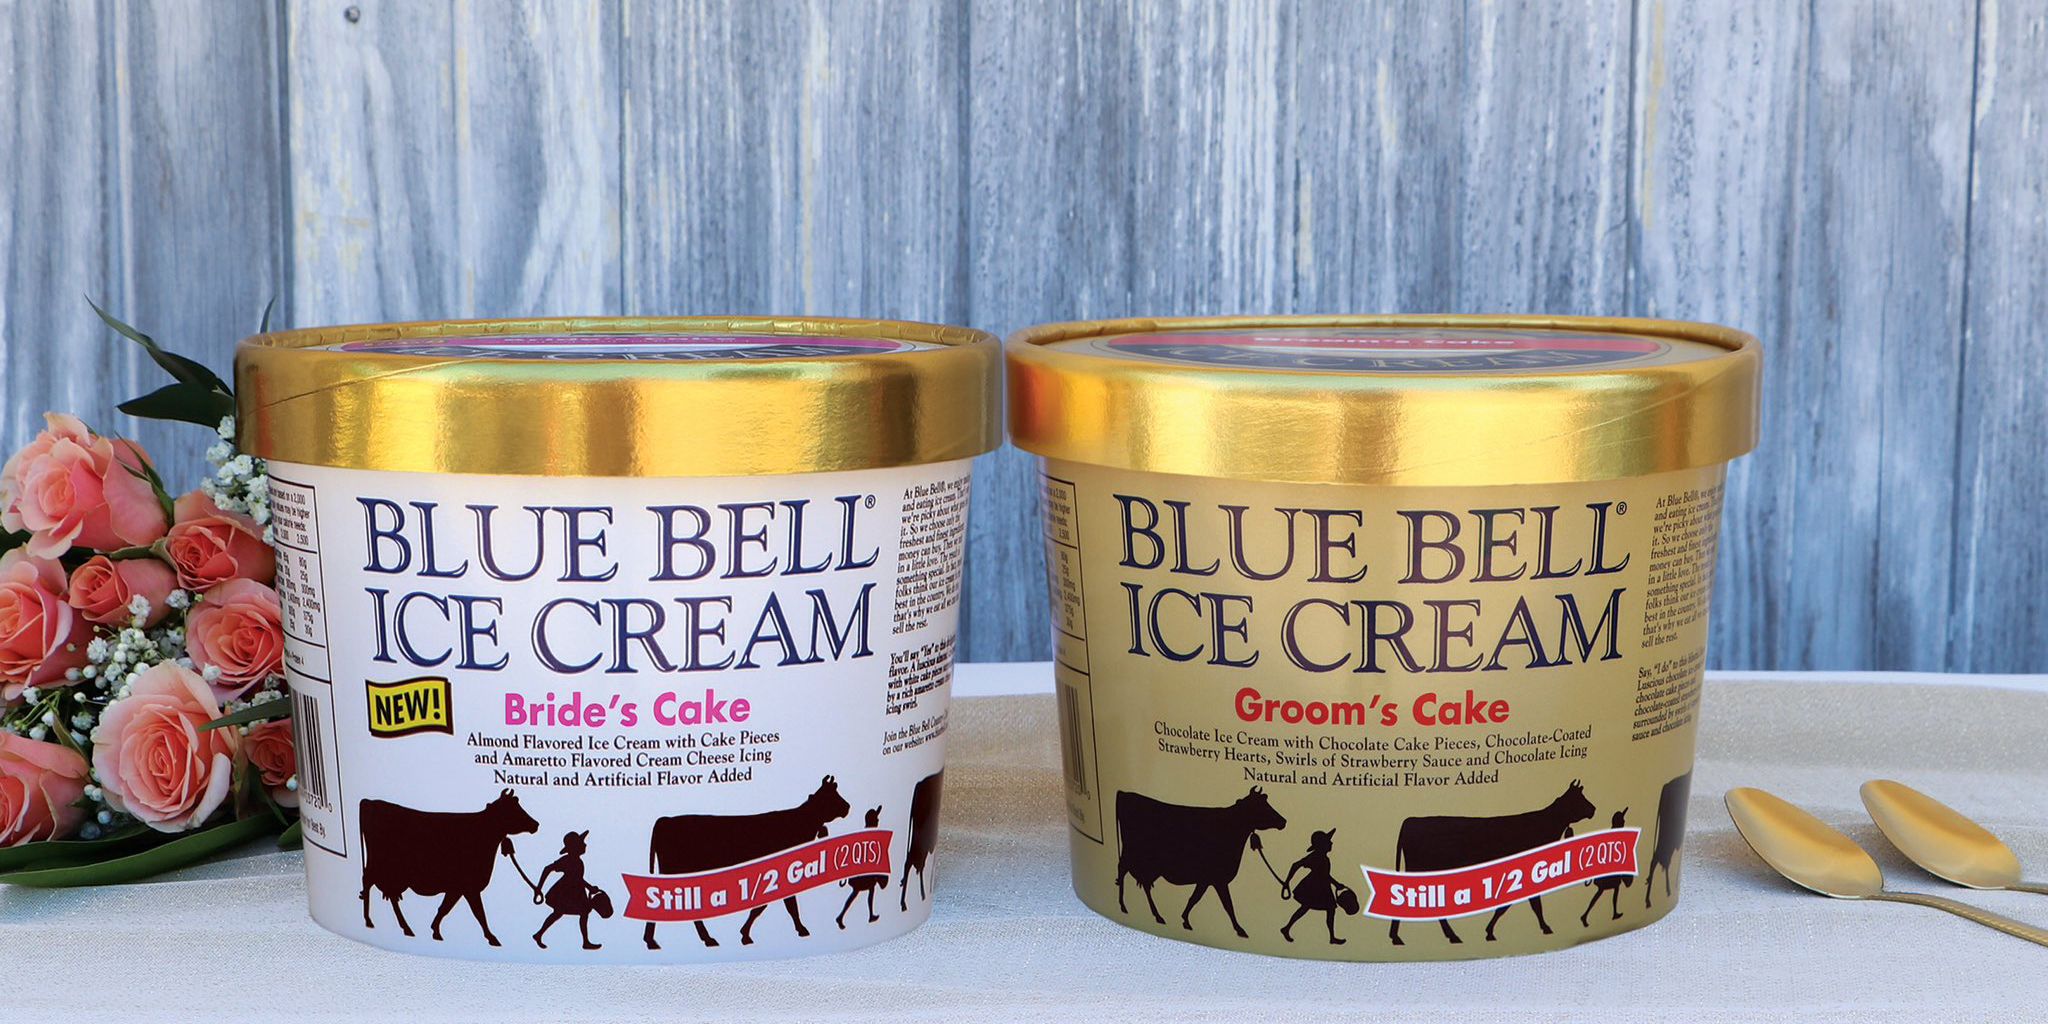 Blue Bell Introduces New Wedding Cake-Inspired Ice Cream, Brings